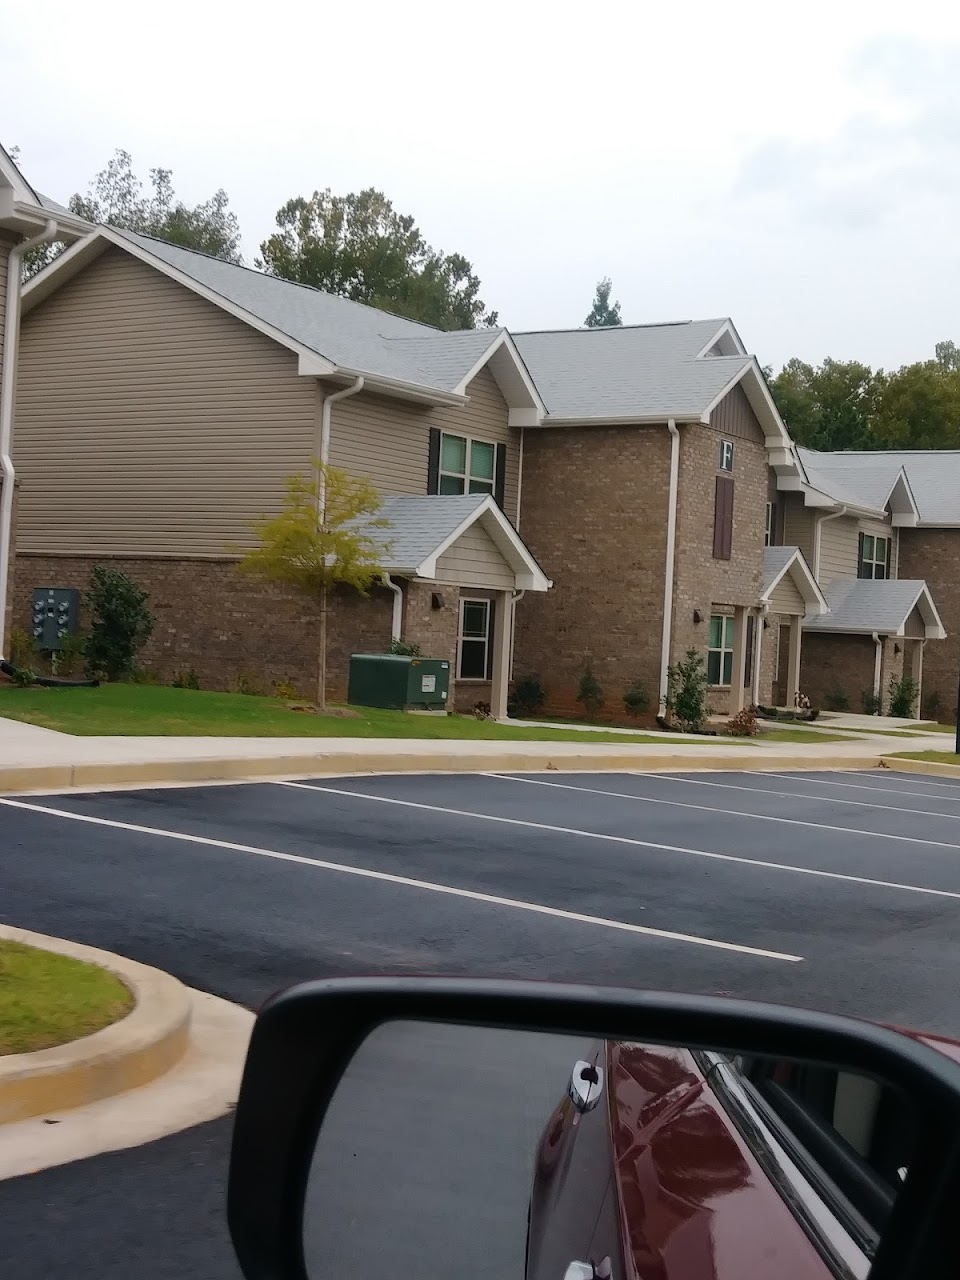 Photo of THE VININGS AT OXFORD. Affordable housing located at 13 BLANCE RD CEDARTOWN, GA 30125